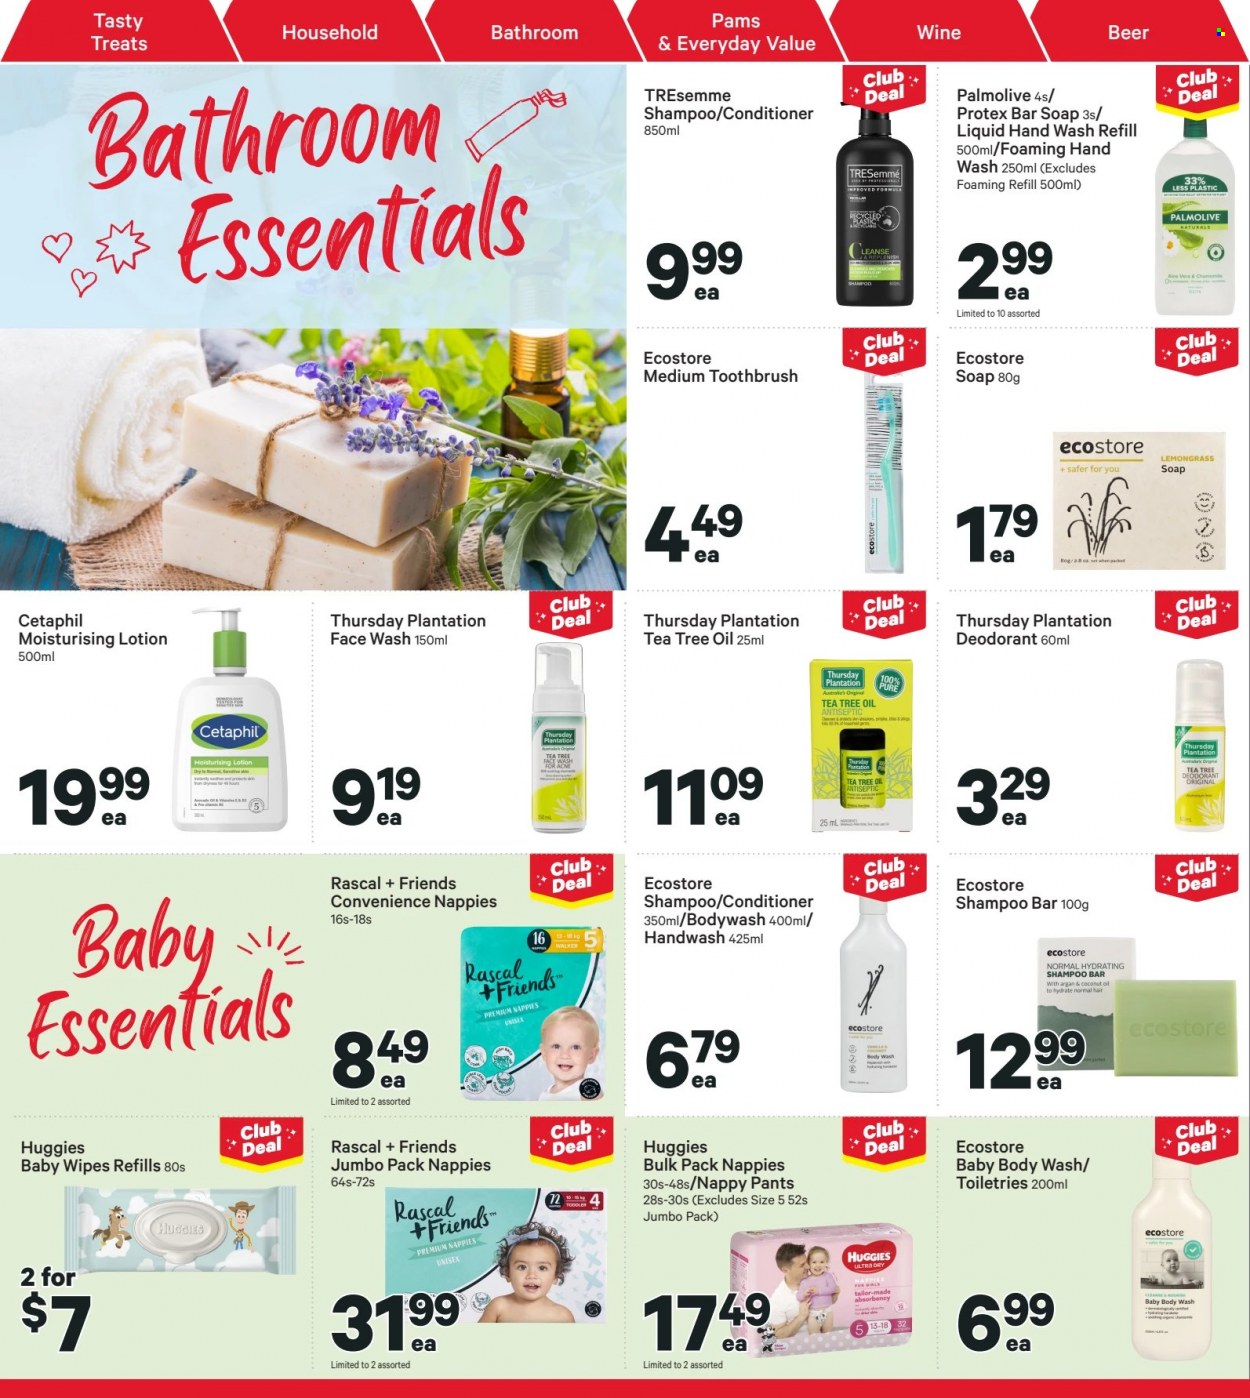 thumbnail - New World mailer - 27.06.2022 - 03.07.2022 - Sales products - oil, tea, wine, beer, wipes, Huggies, pants, baby wipes, nappies, body wash, shampoo, hand wash, Palmolive, Protex, face gel, soap bar, soap, toothbrush, face wash, conditioner, TRESemmé, body lotion, anti-perspirant, deodorant, tea tree oil. Page 28.